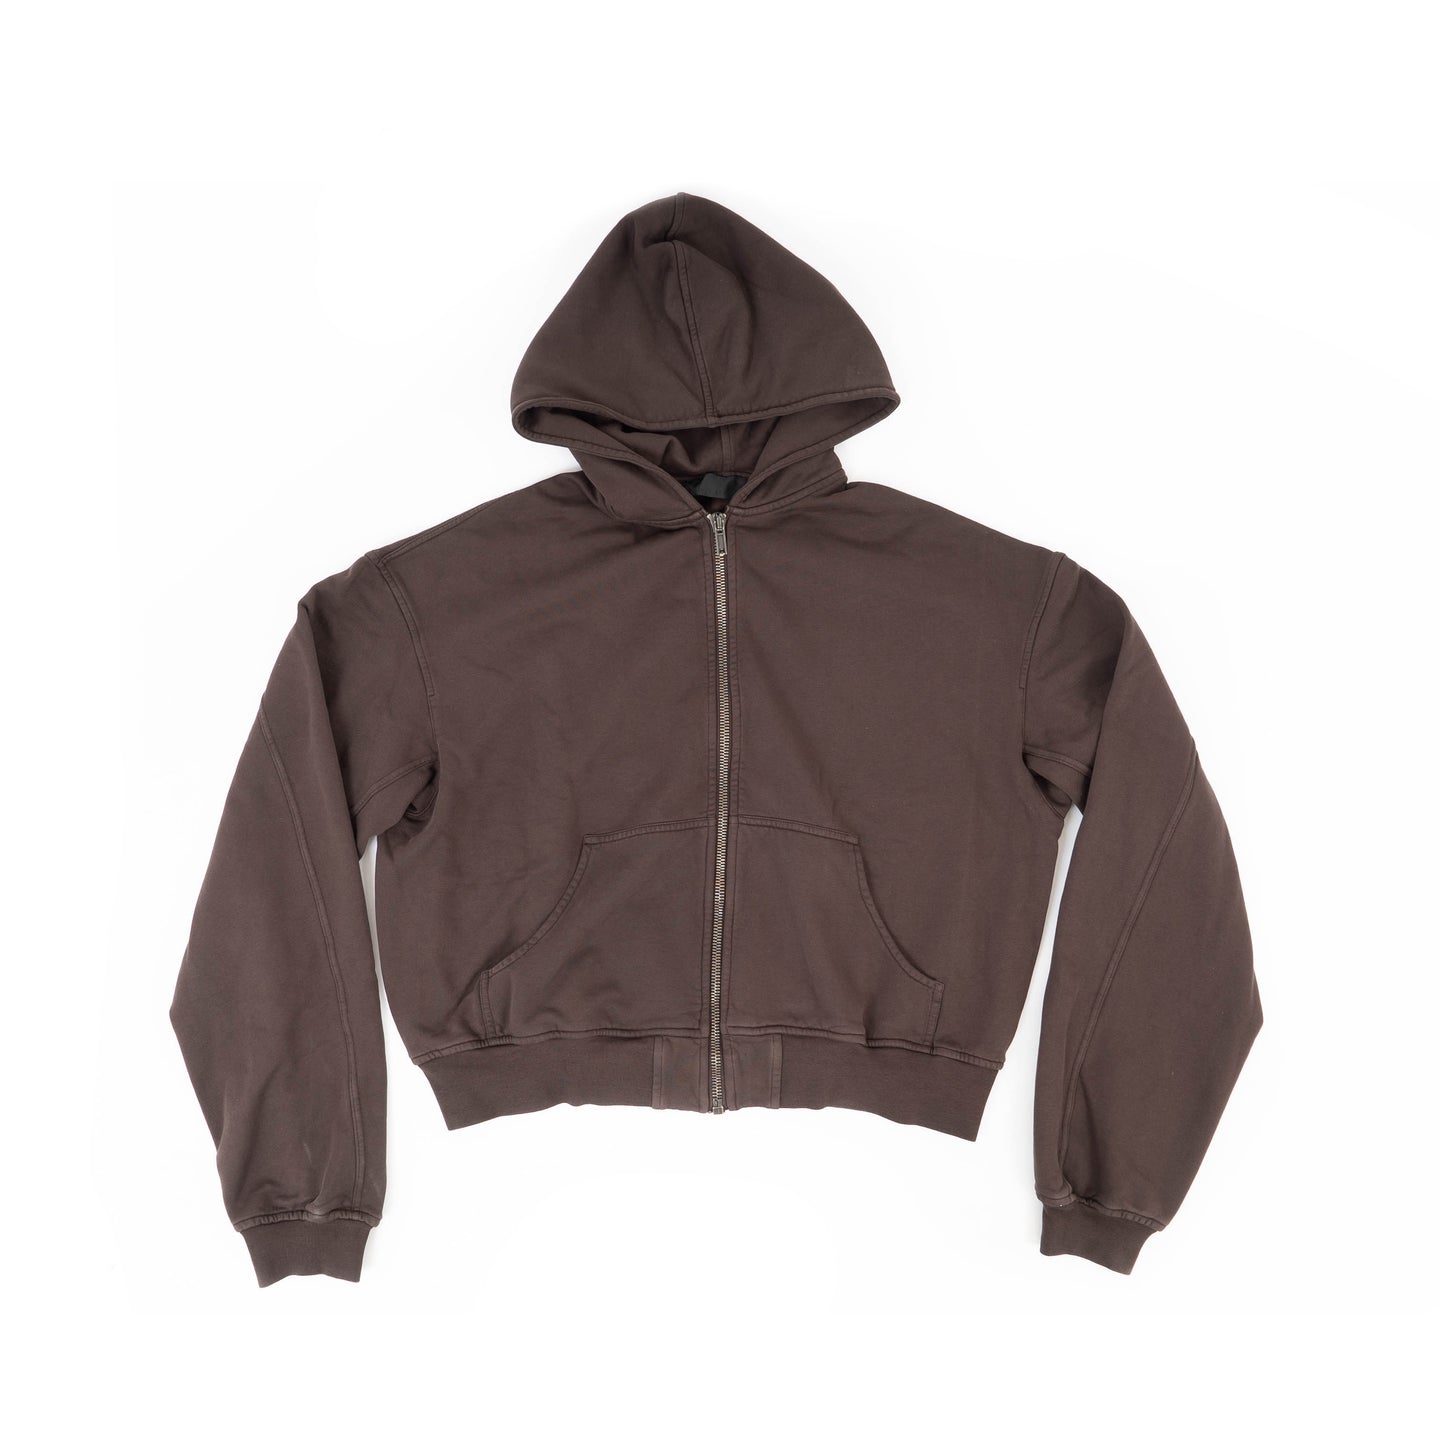 SS21 Brown Embroidered Perth Zip Hoodie